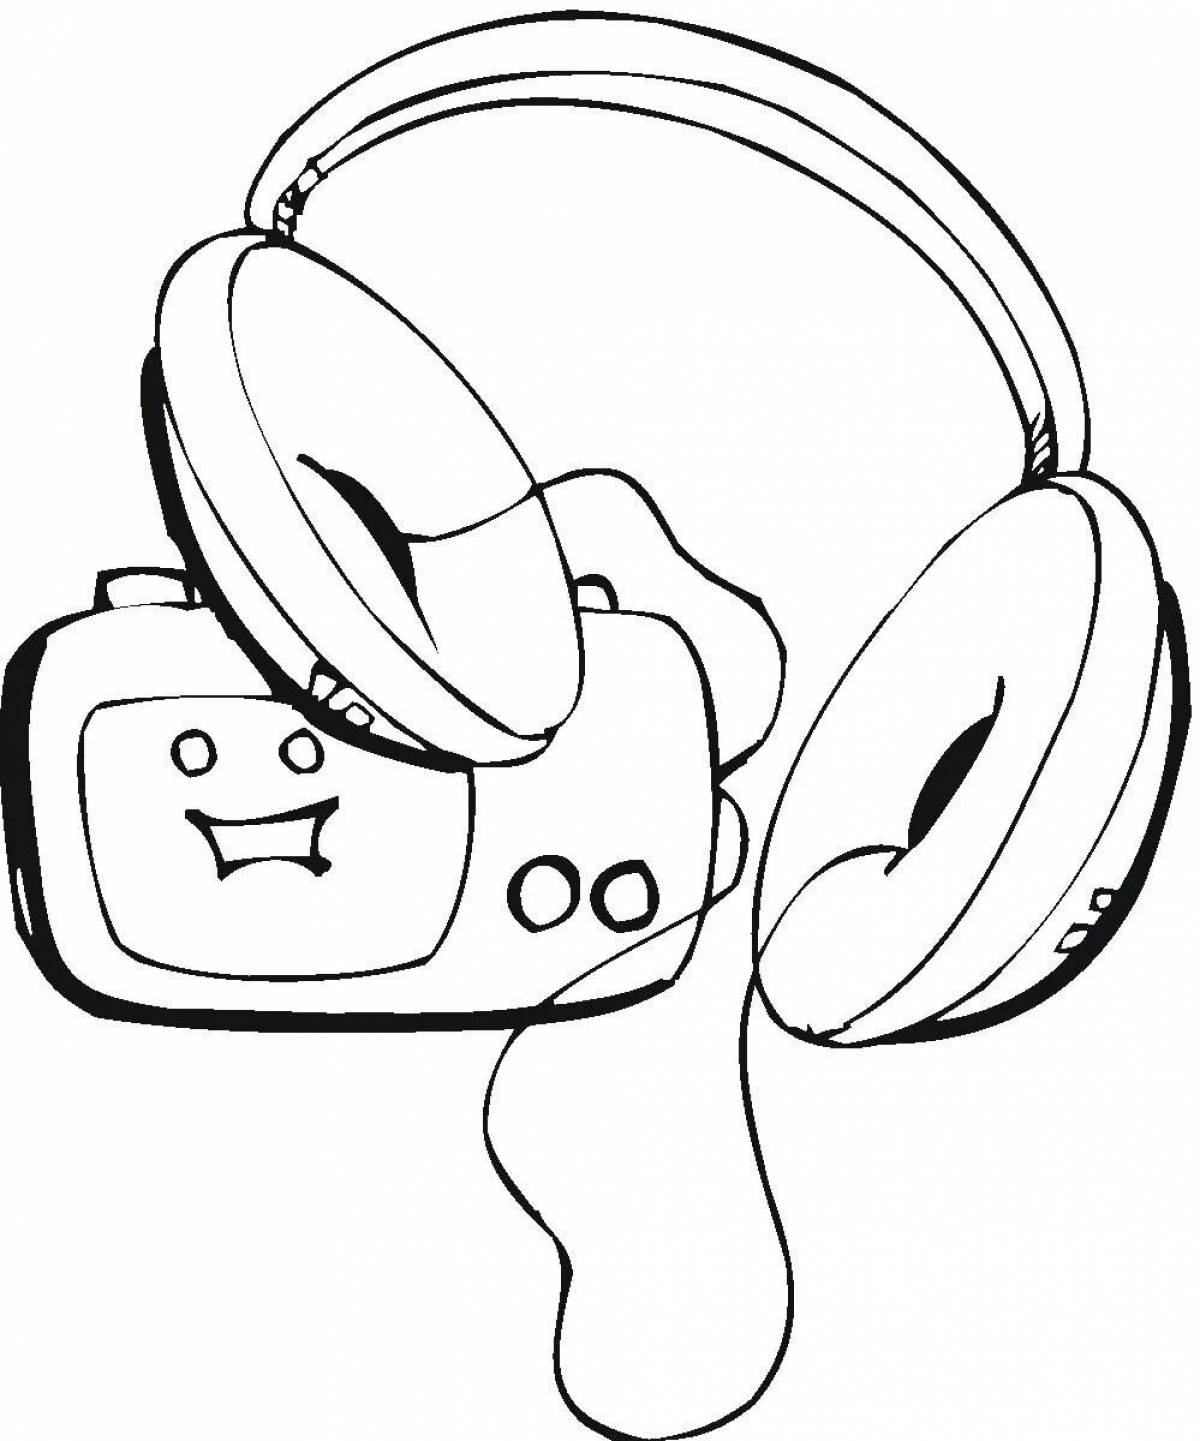 Coloring page with headphones for toddlers